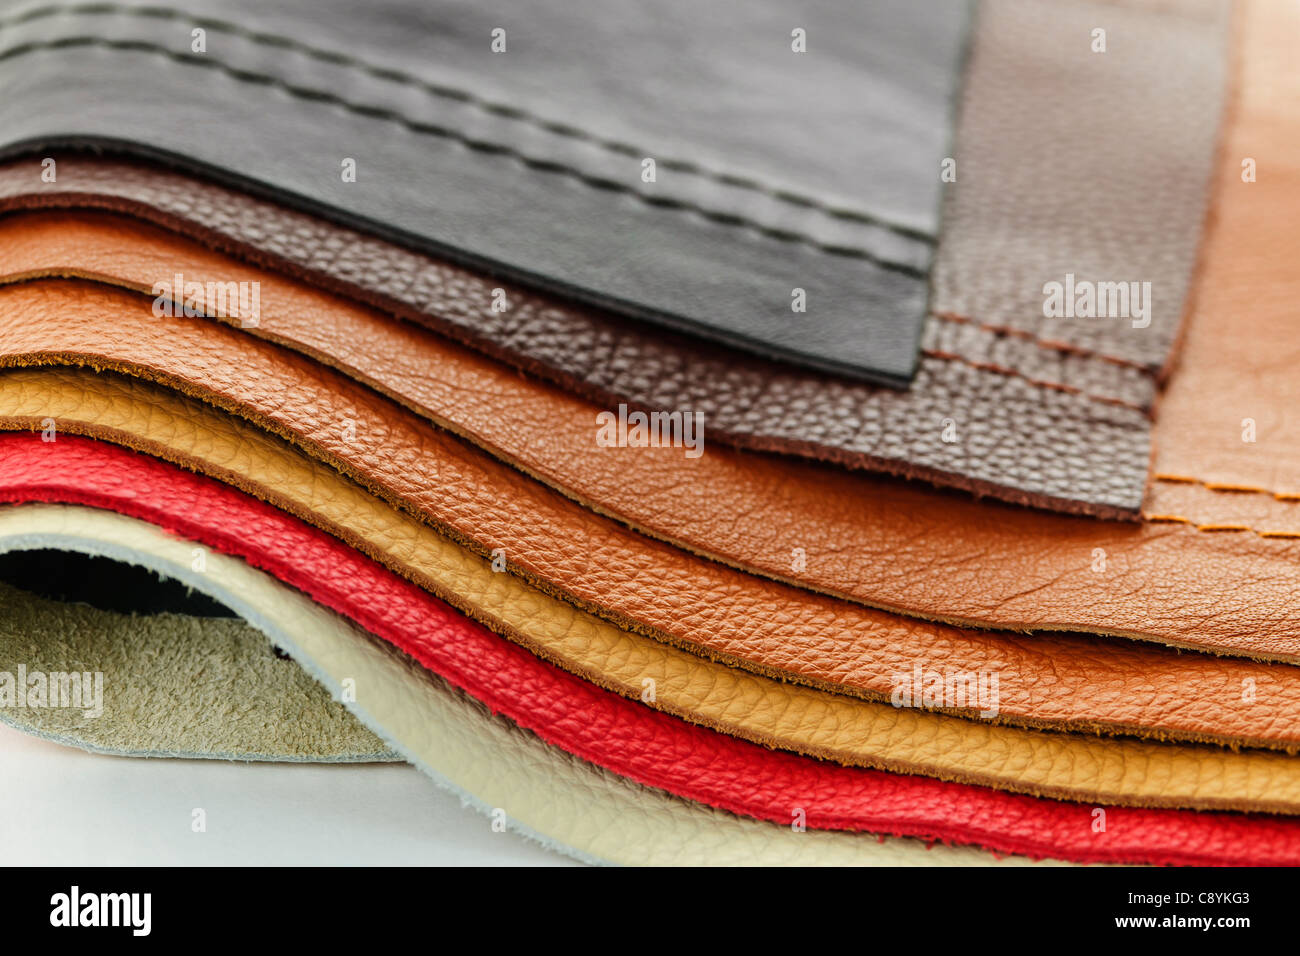 Natural leather upholstery samples with stitching in various colors Stock Photo